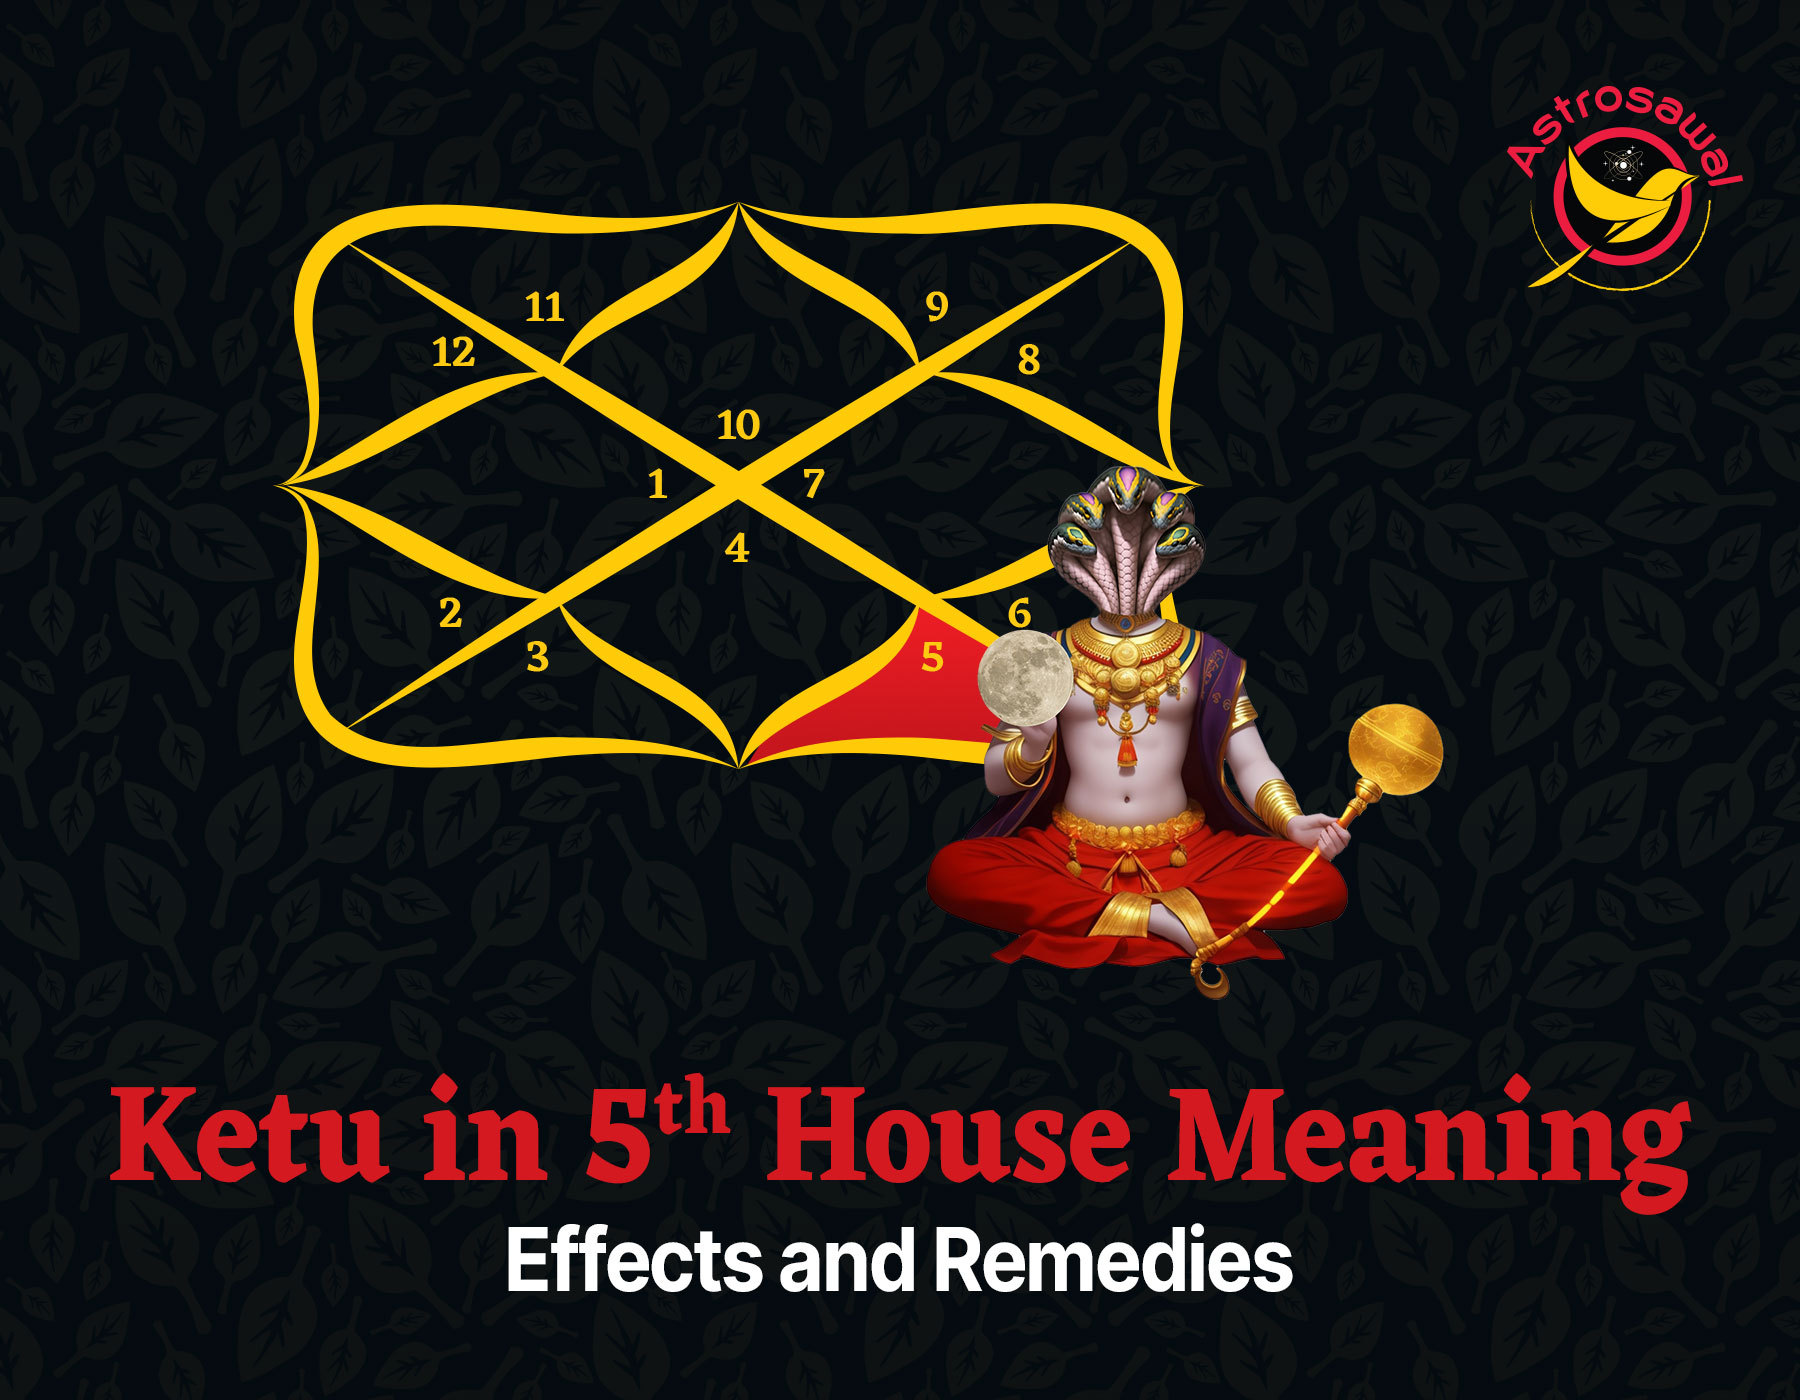 Ketu in 5th House Meaning, Effects and Remedies